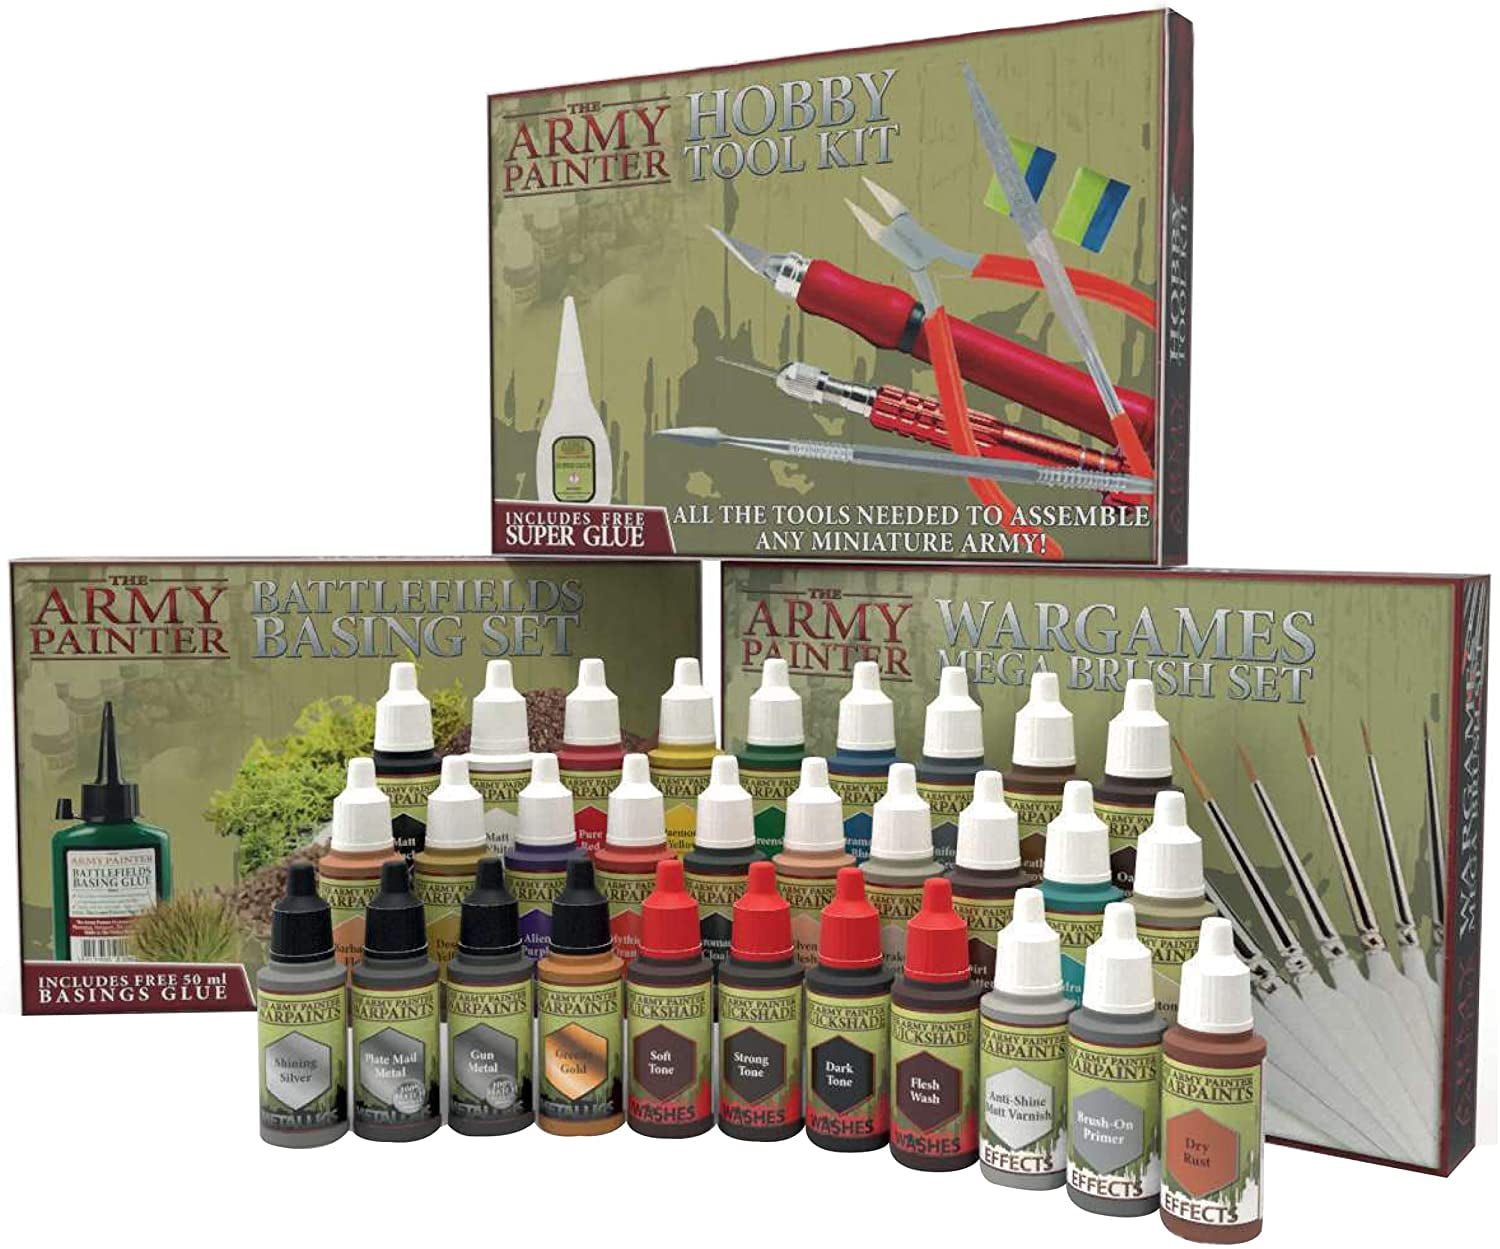 Masterclass Drybrush Set - 3 special-designed brushes - The Army Painter